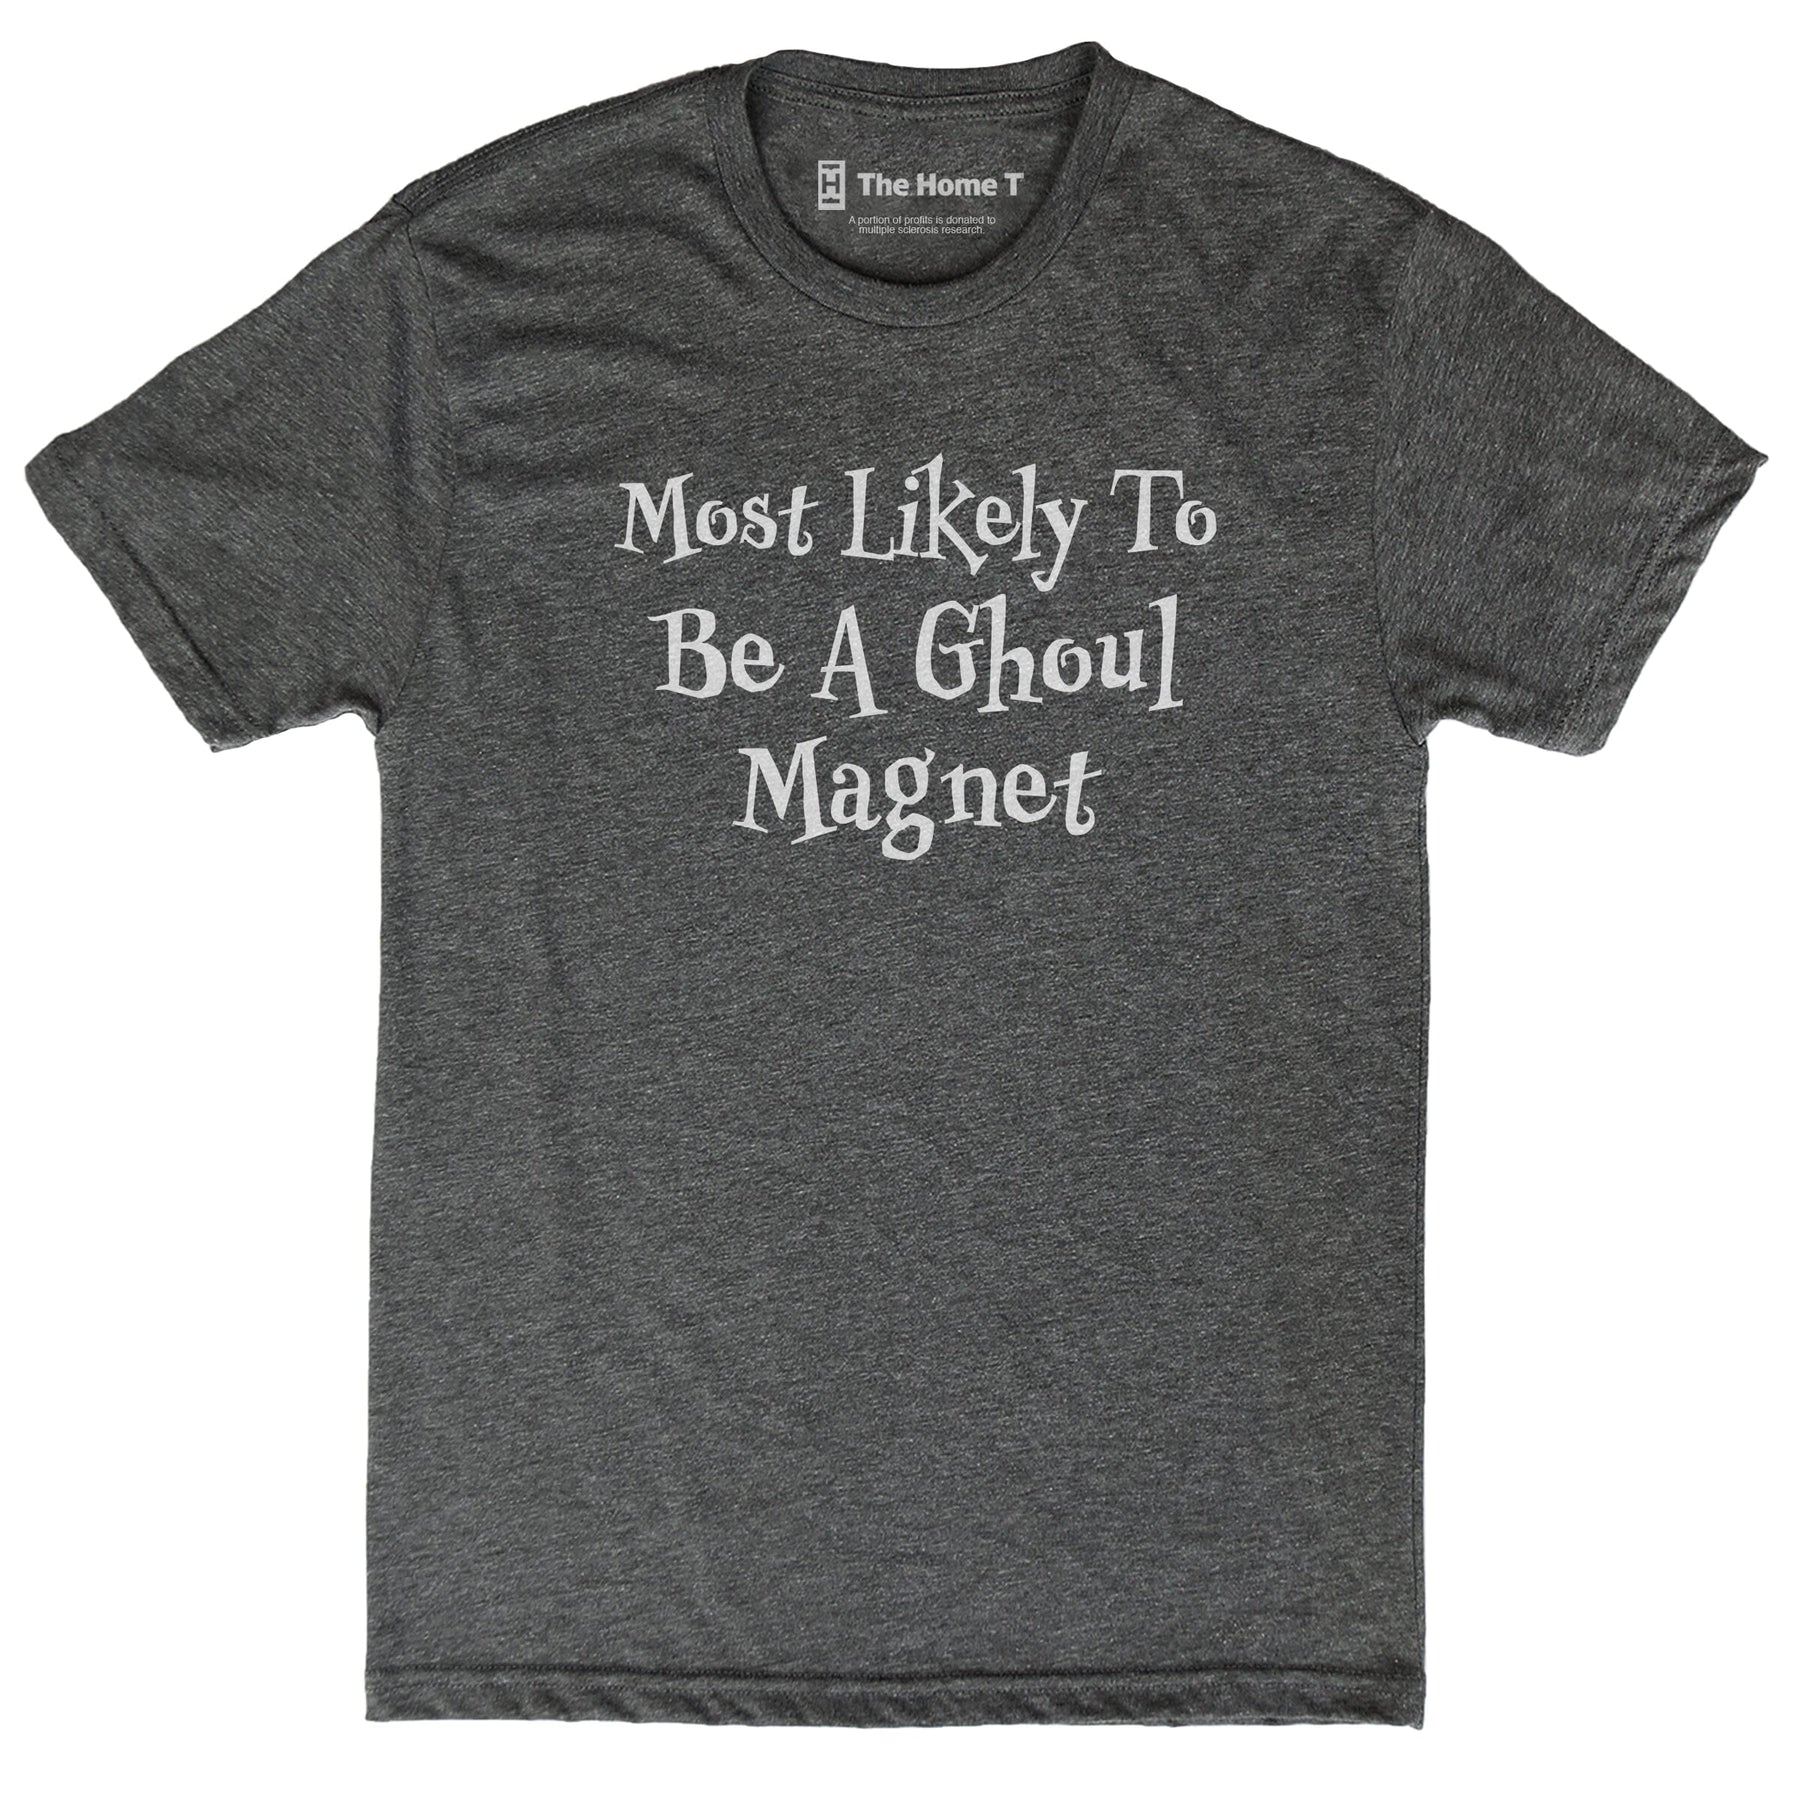 Most Likely to be a Ghoul Magnet